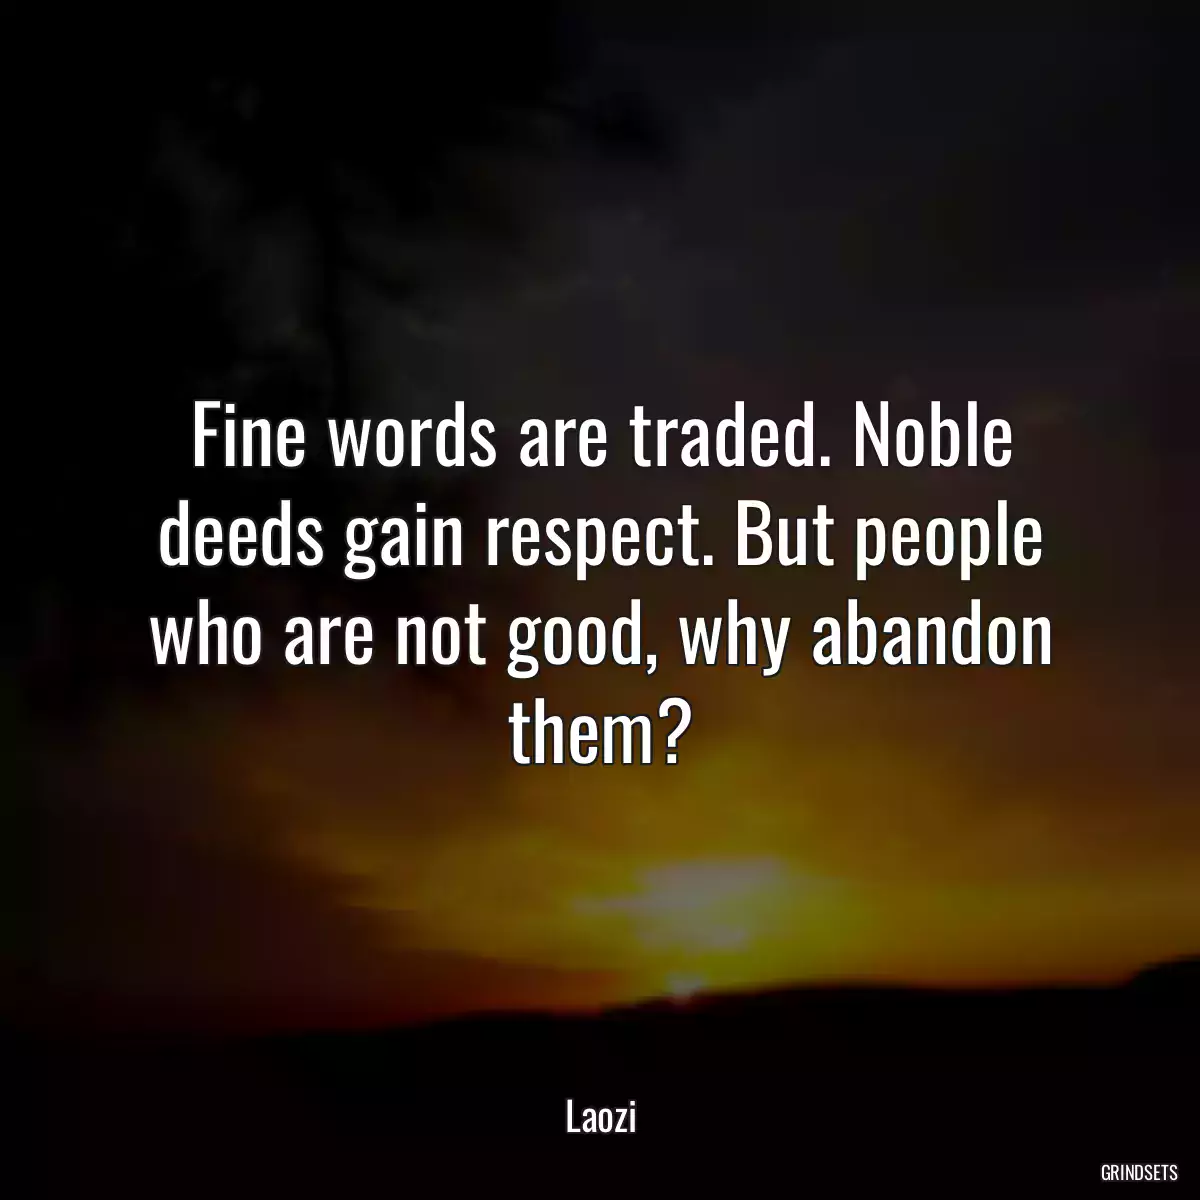 Fine words are traded. Noble deeds gain respect. But people who are not good, why abandon them?